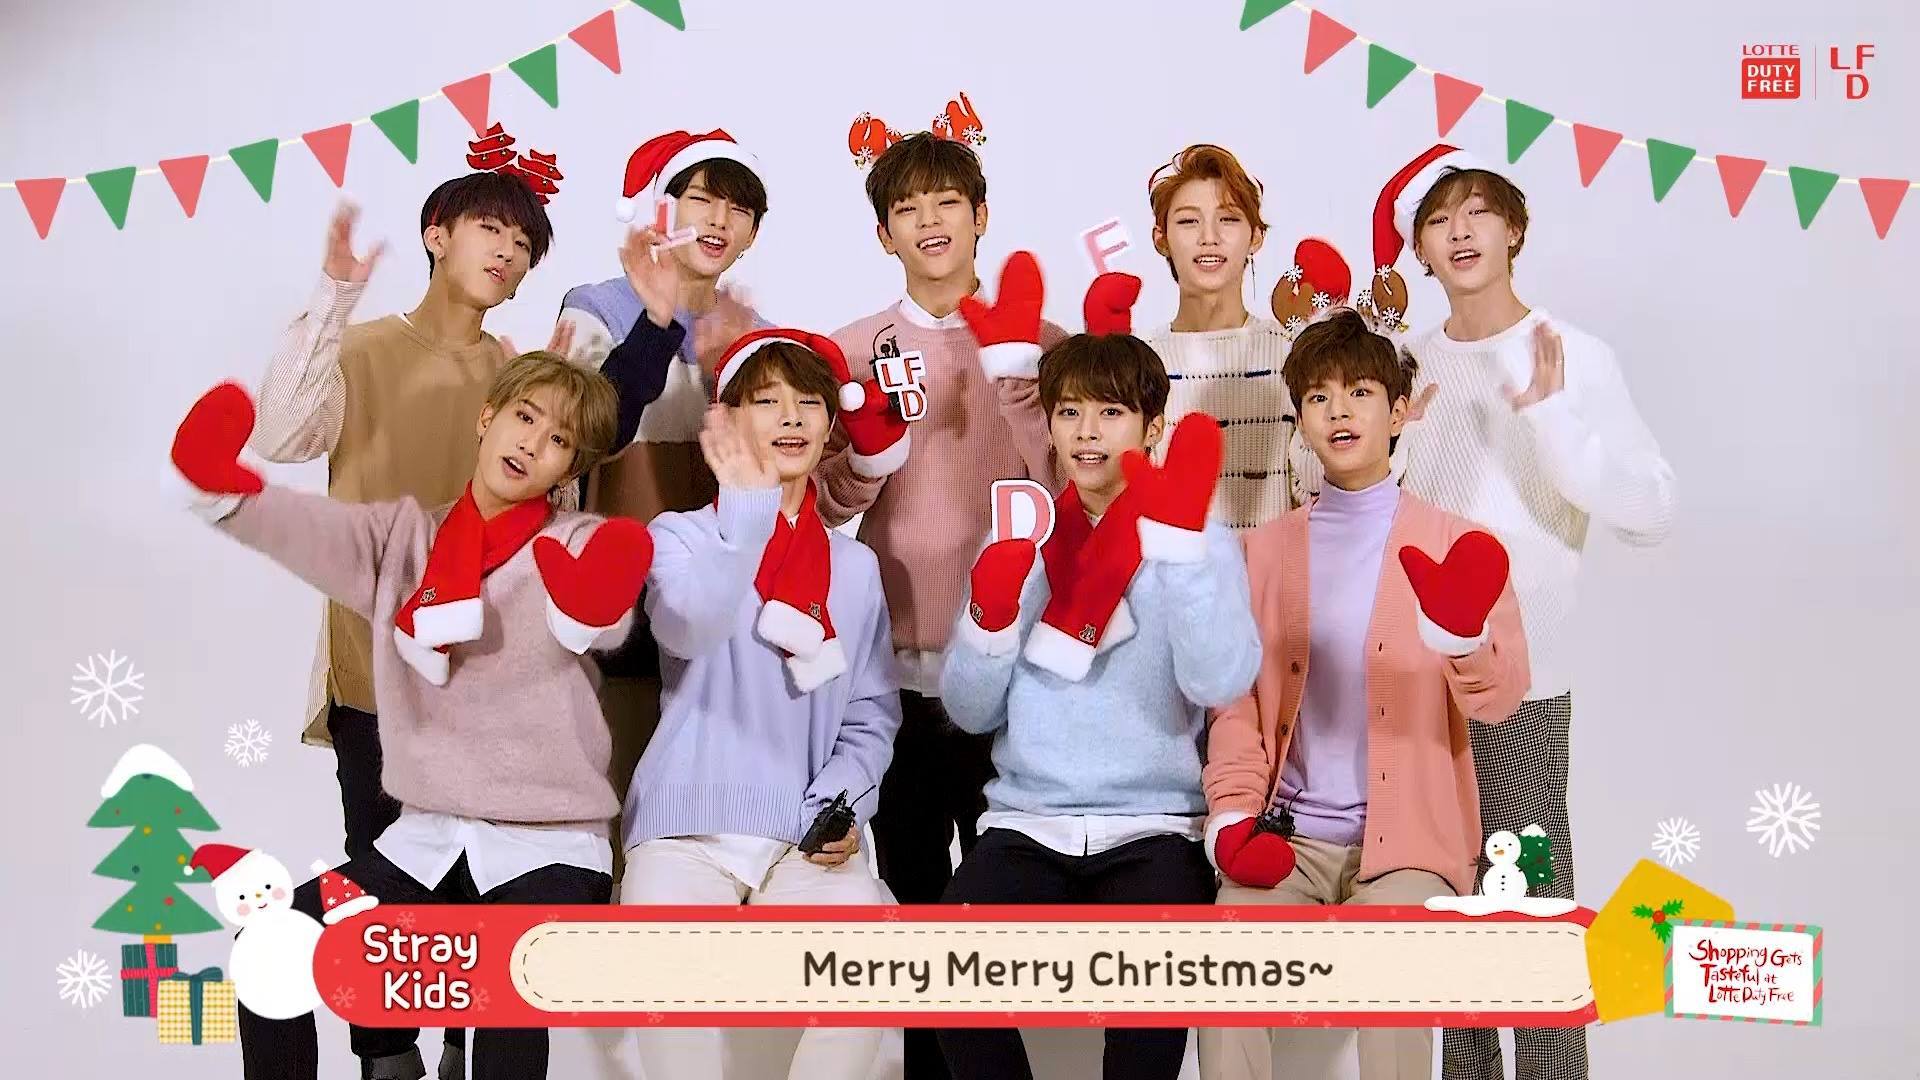 LOTTE DUTY FREE] Have a merry merry Christmas from StrayKids